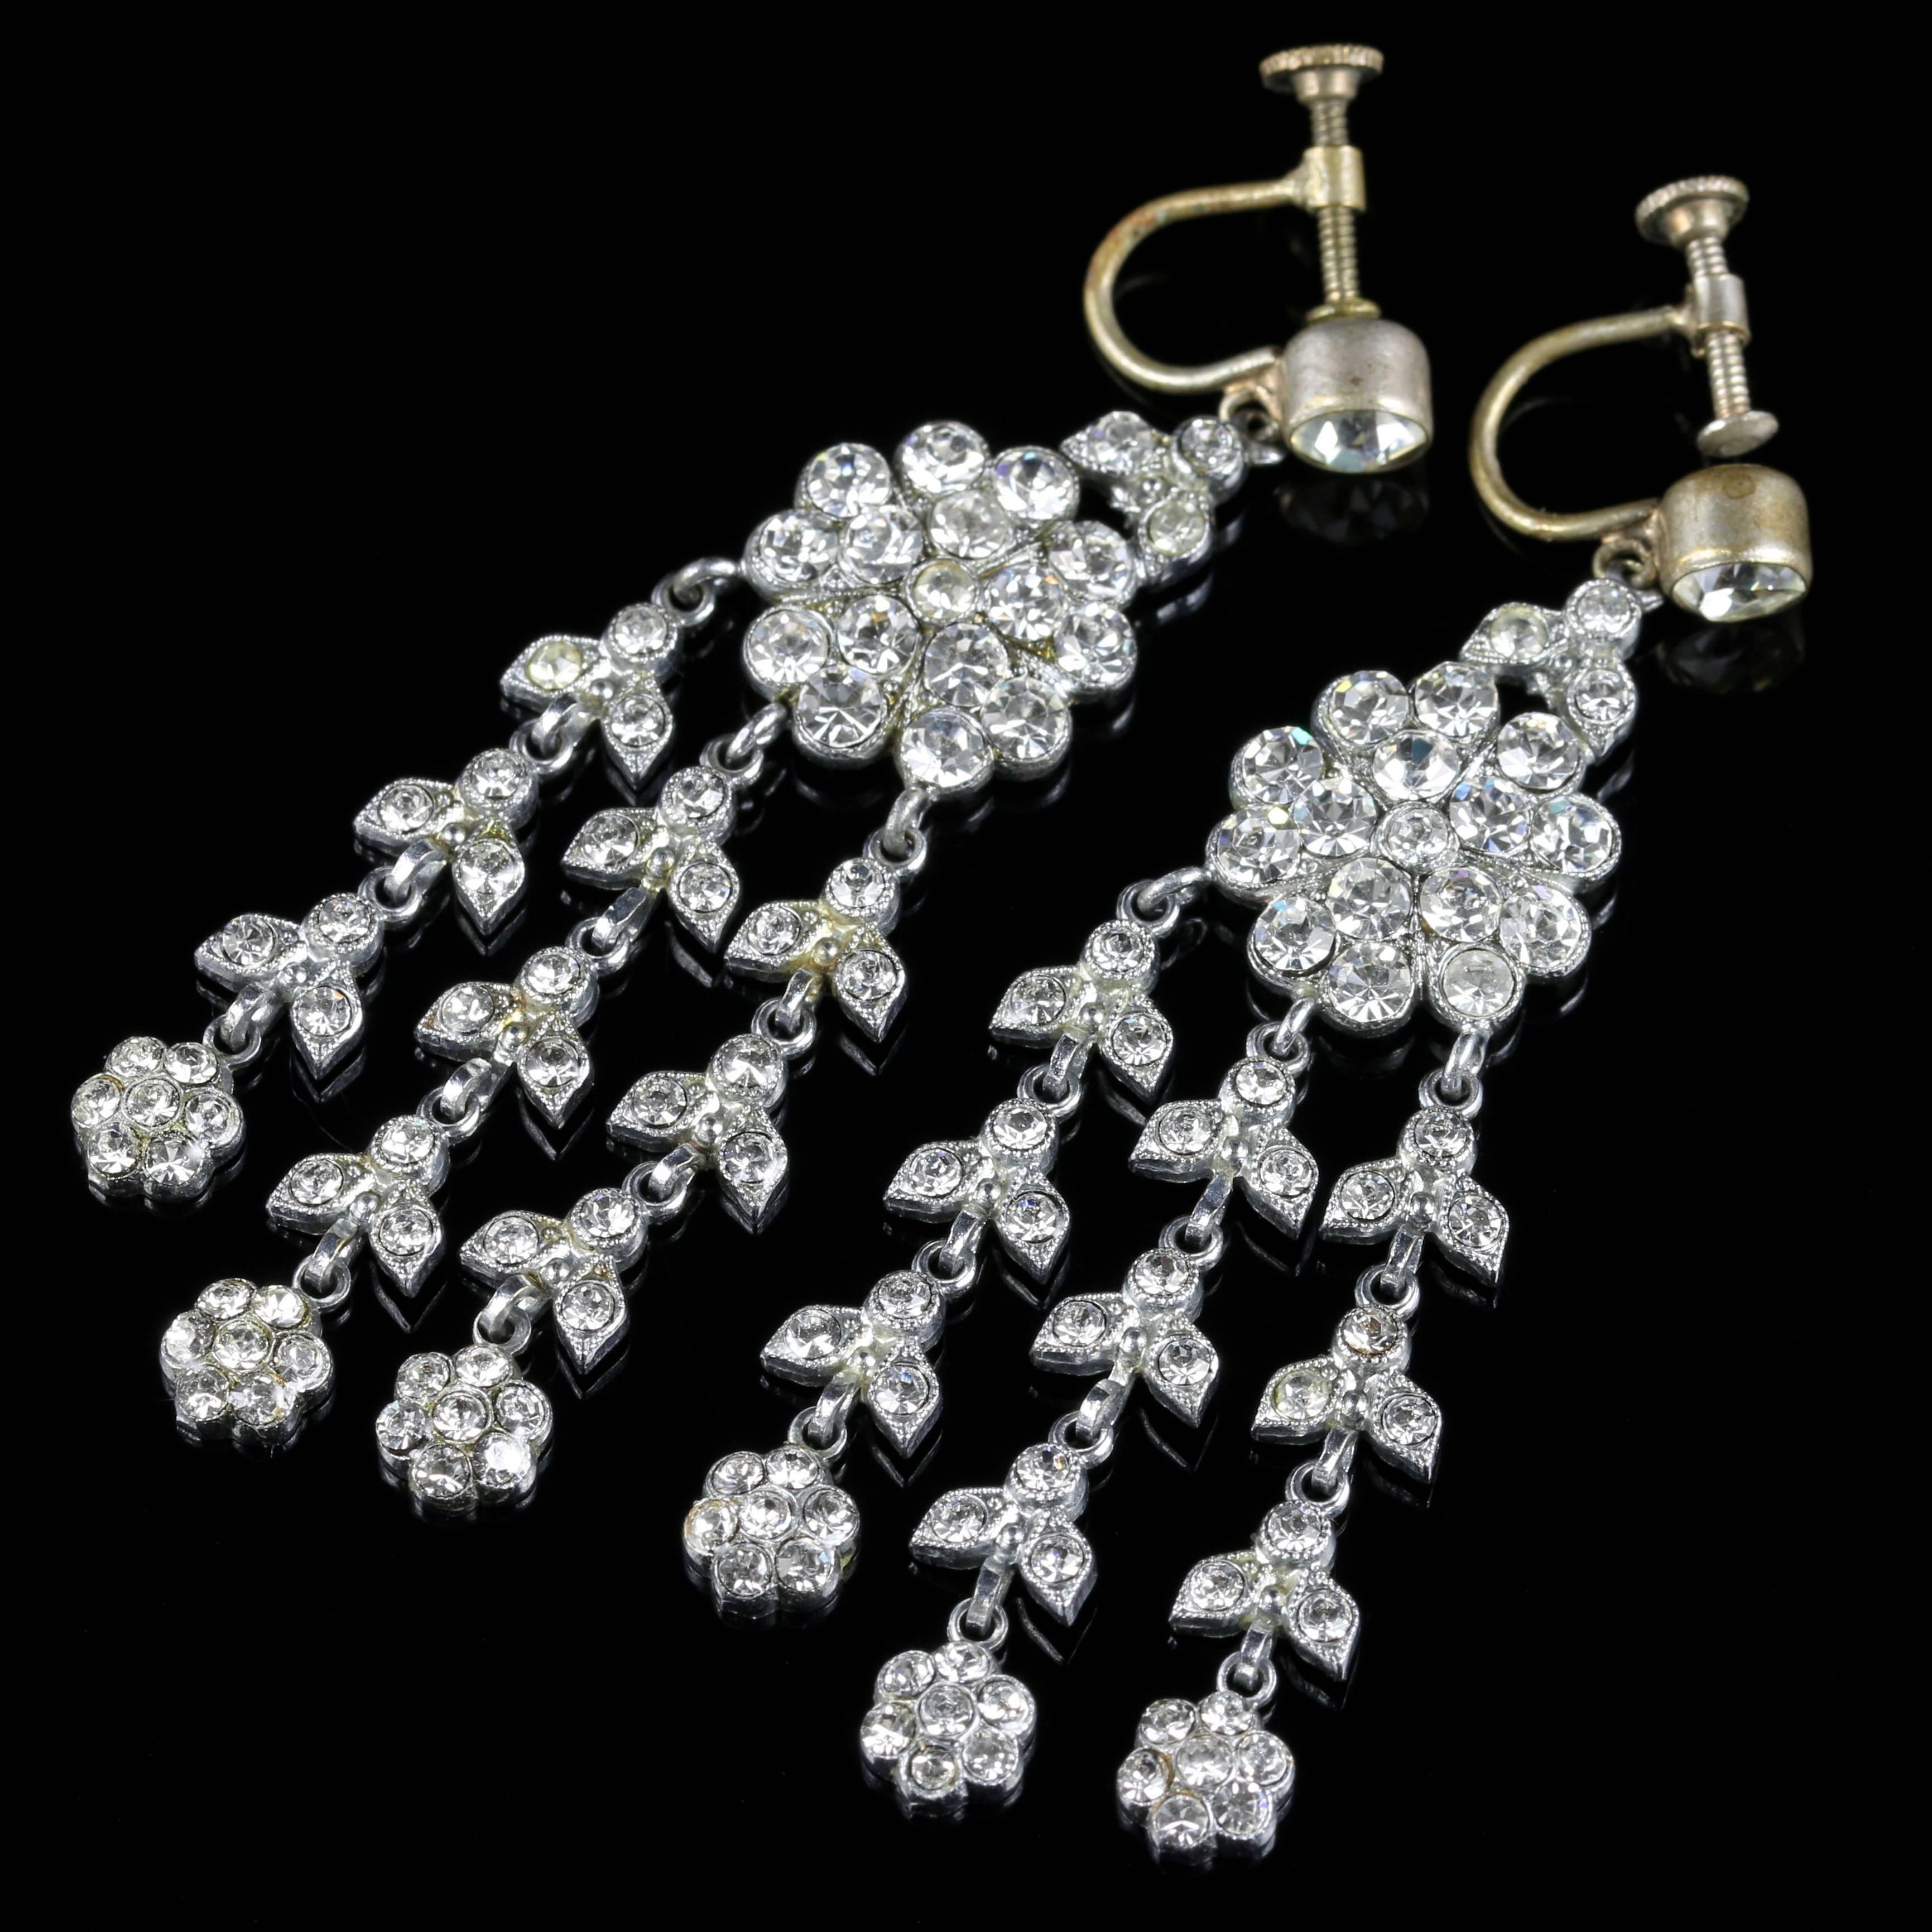 For more details please click continue reading down below...

These are a fabulous pair of long Paste earrings set in white Metal.

Set with a large Paste stone at the top which is 0.50ct in size.

A large cluster of Paste stones then lead down to 3